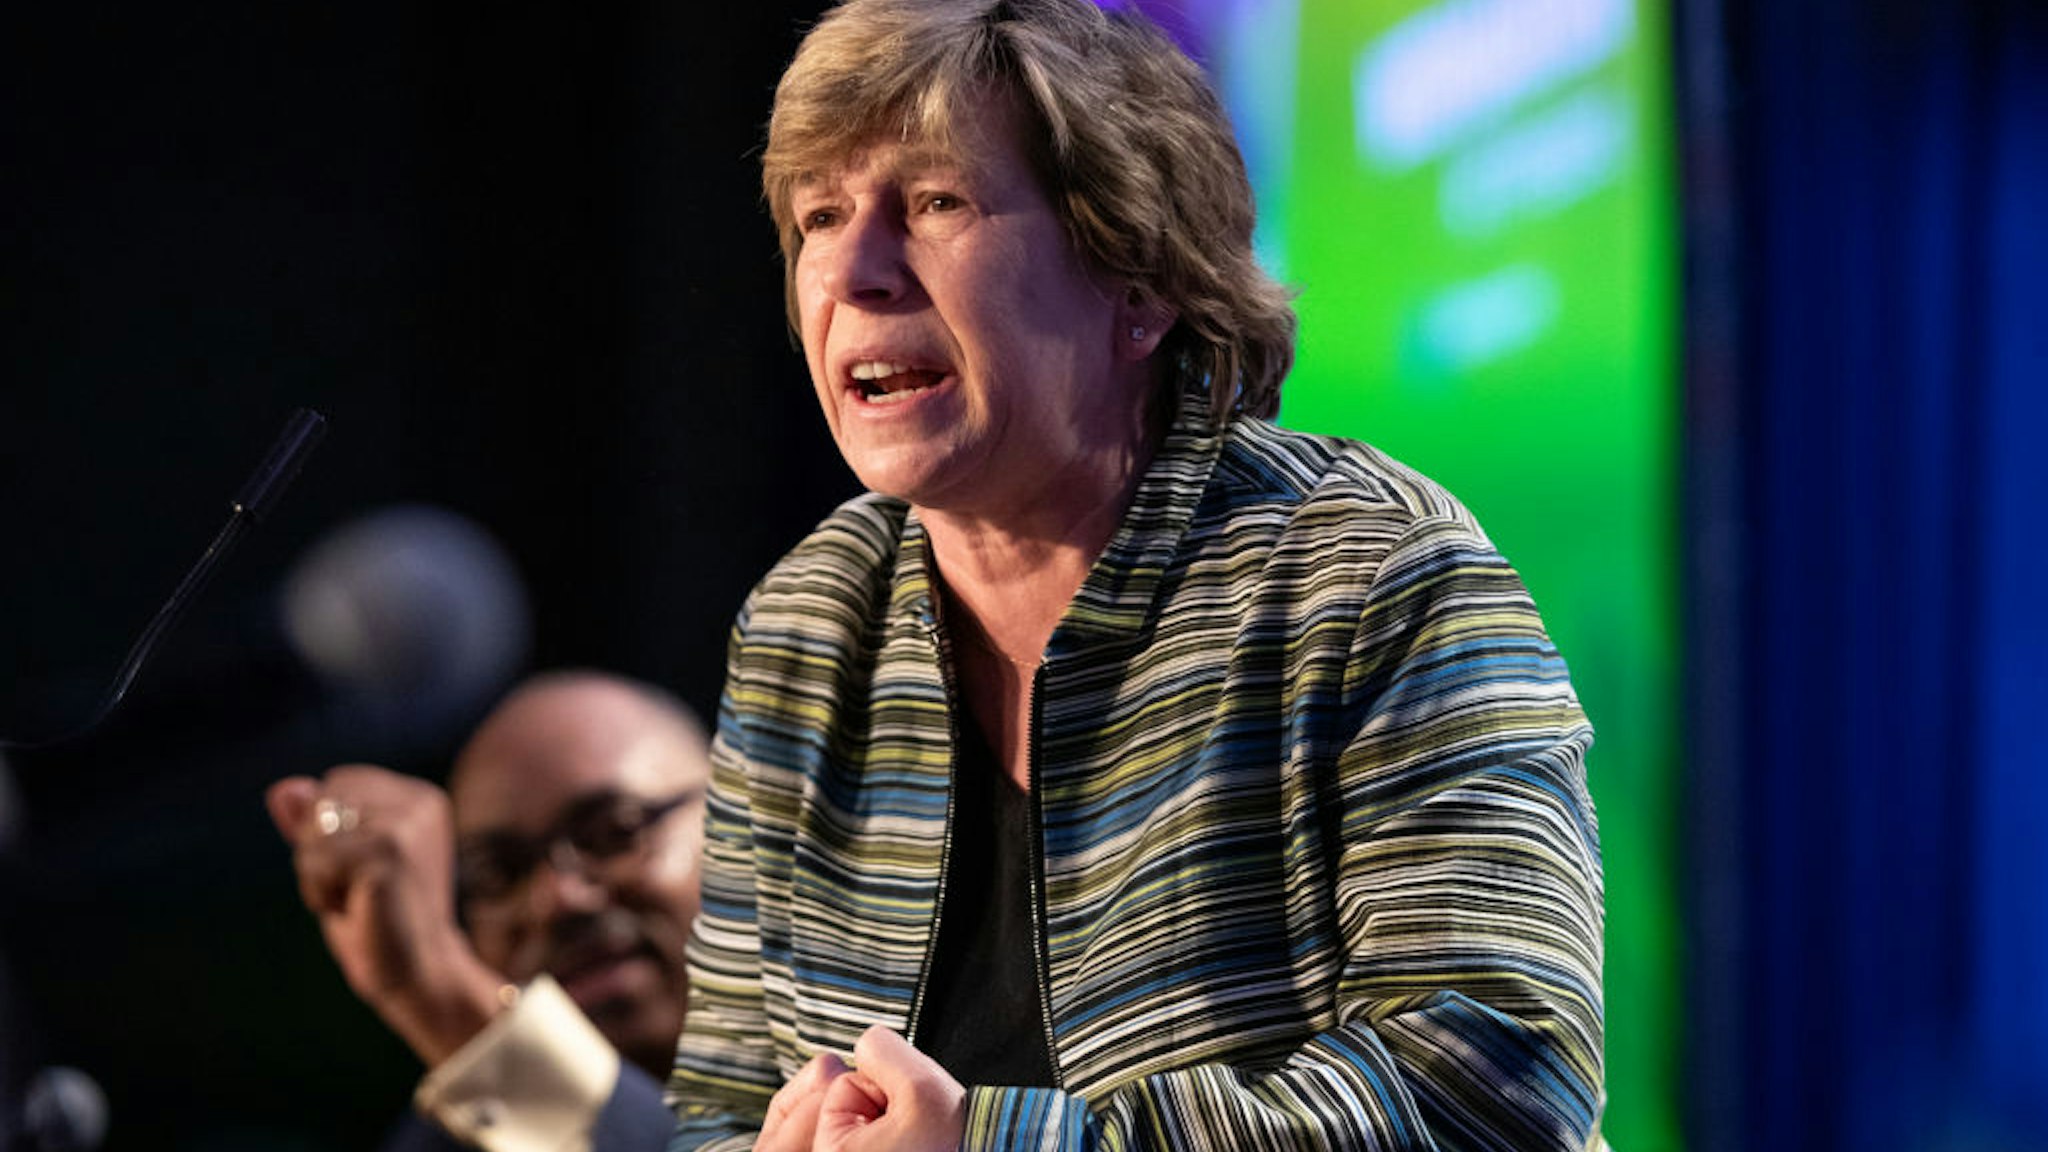 Randi Weingarten, president of the American Federation of Teachers, speaks during the American Federation of Government Employees (AFGE) Legislative and Grassroots Mobilization Conference in Washington, D.C., U.S., on Monday, Feb. 10, 2020.